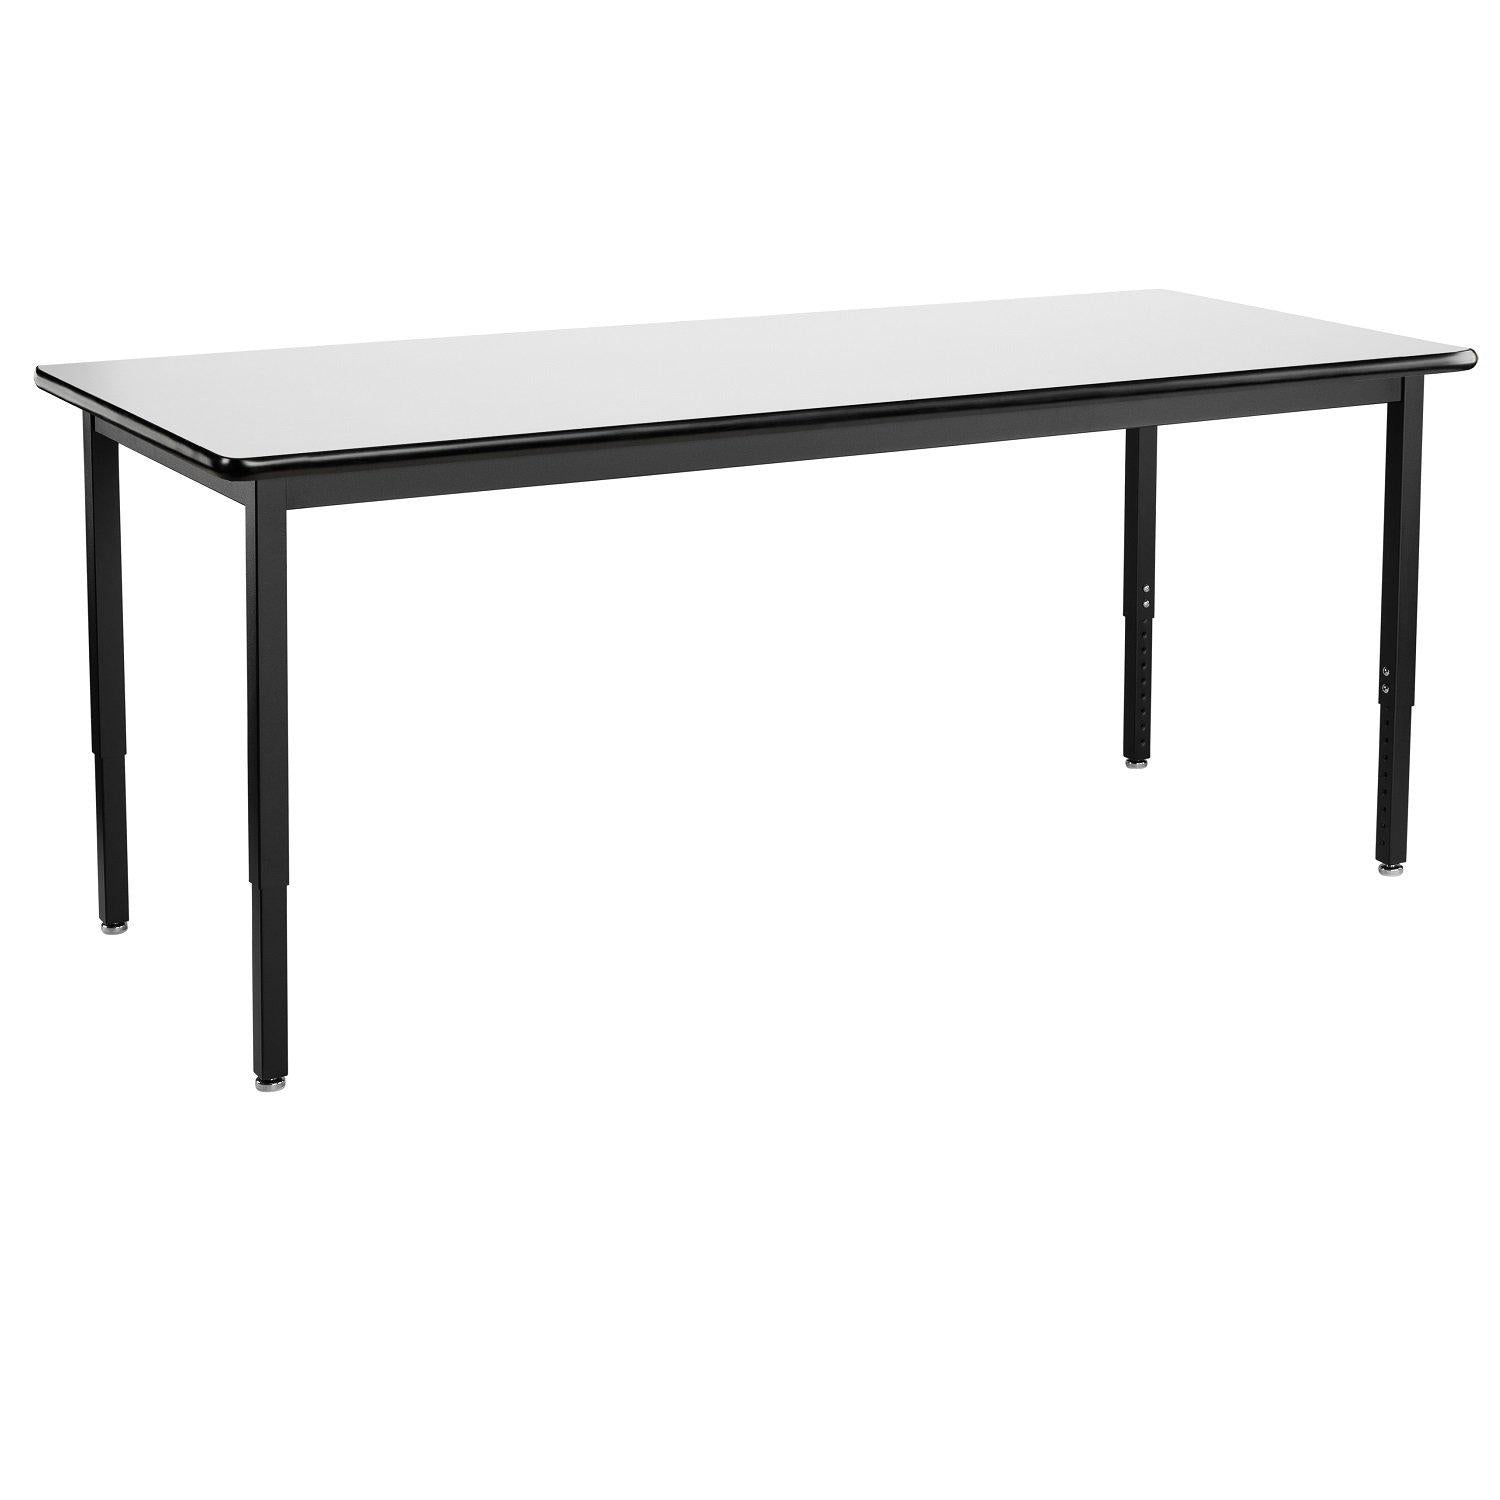 Heavy-Duty Height-Adjustable Utility Table, Black Frame, 30" x 84", Whiteboard High-Pressure Laminate Top